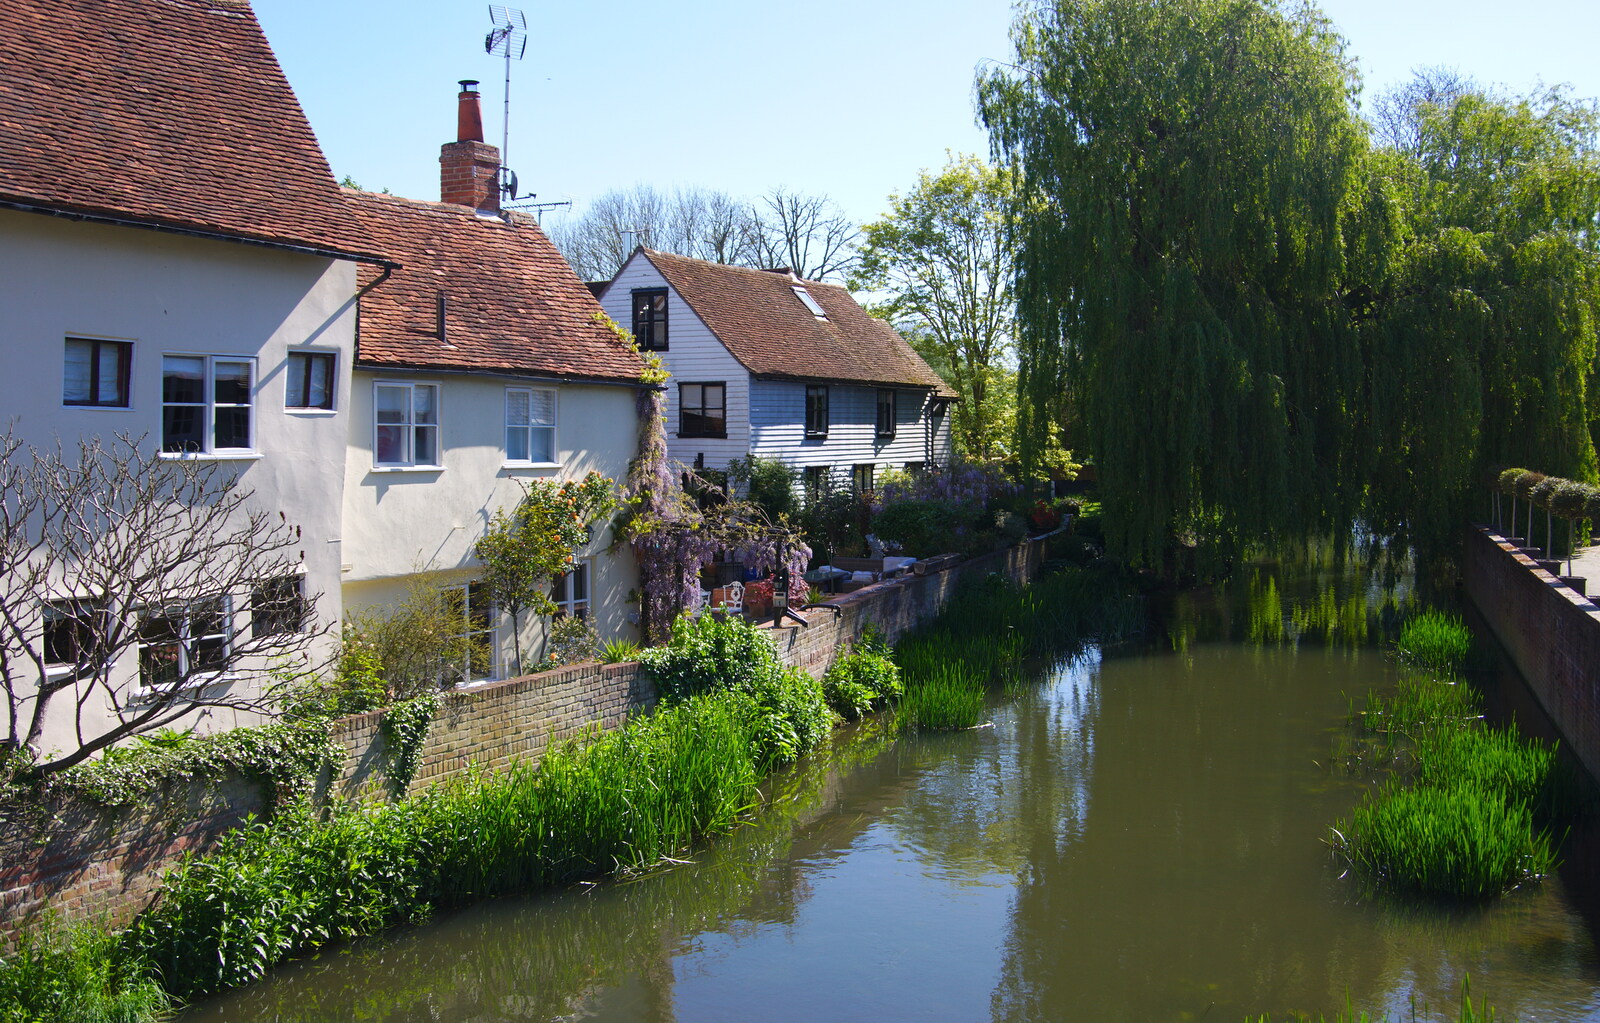 Some nice houses down by the river from The BSCC Bike Ride 2019, Coggeshall, Essex - 11th May 2019